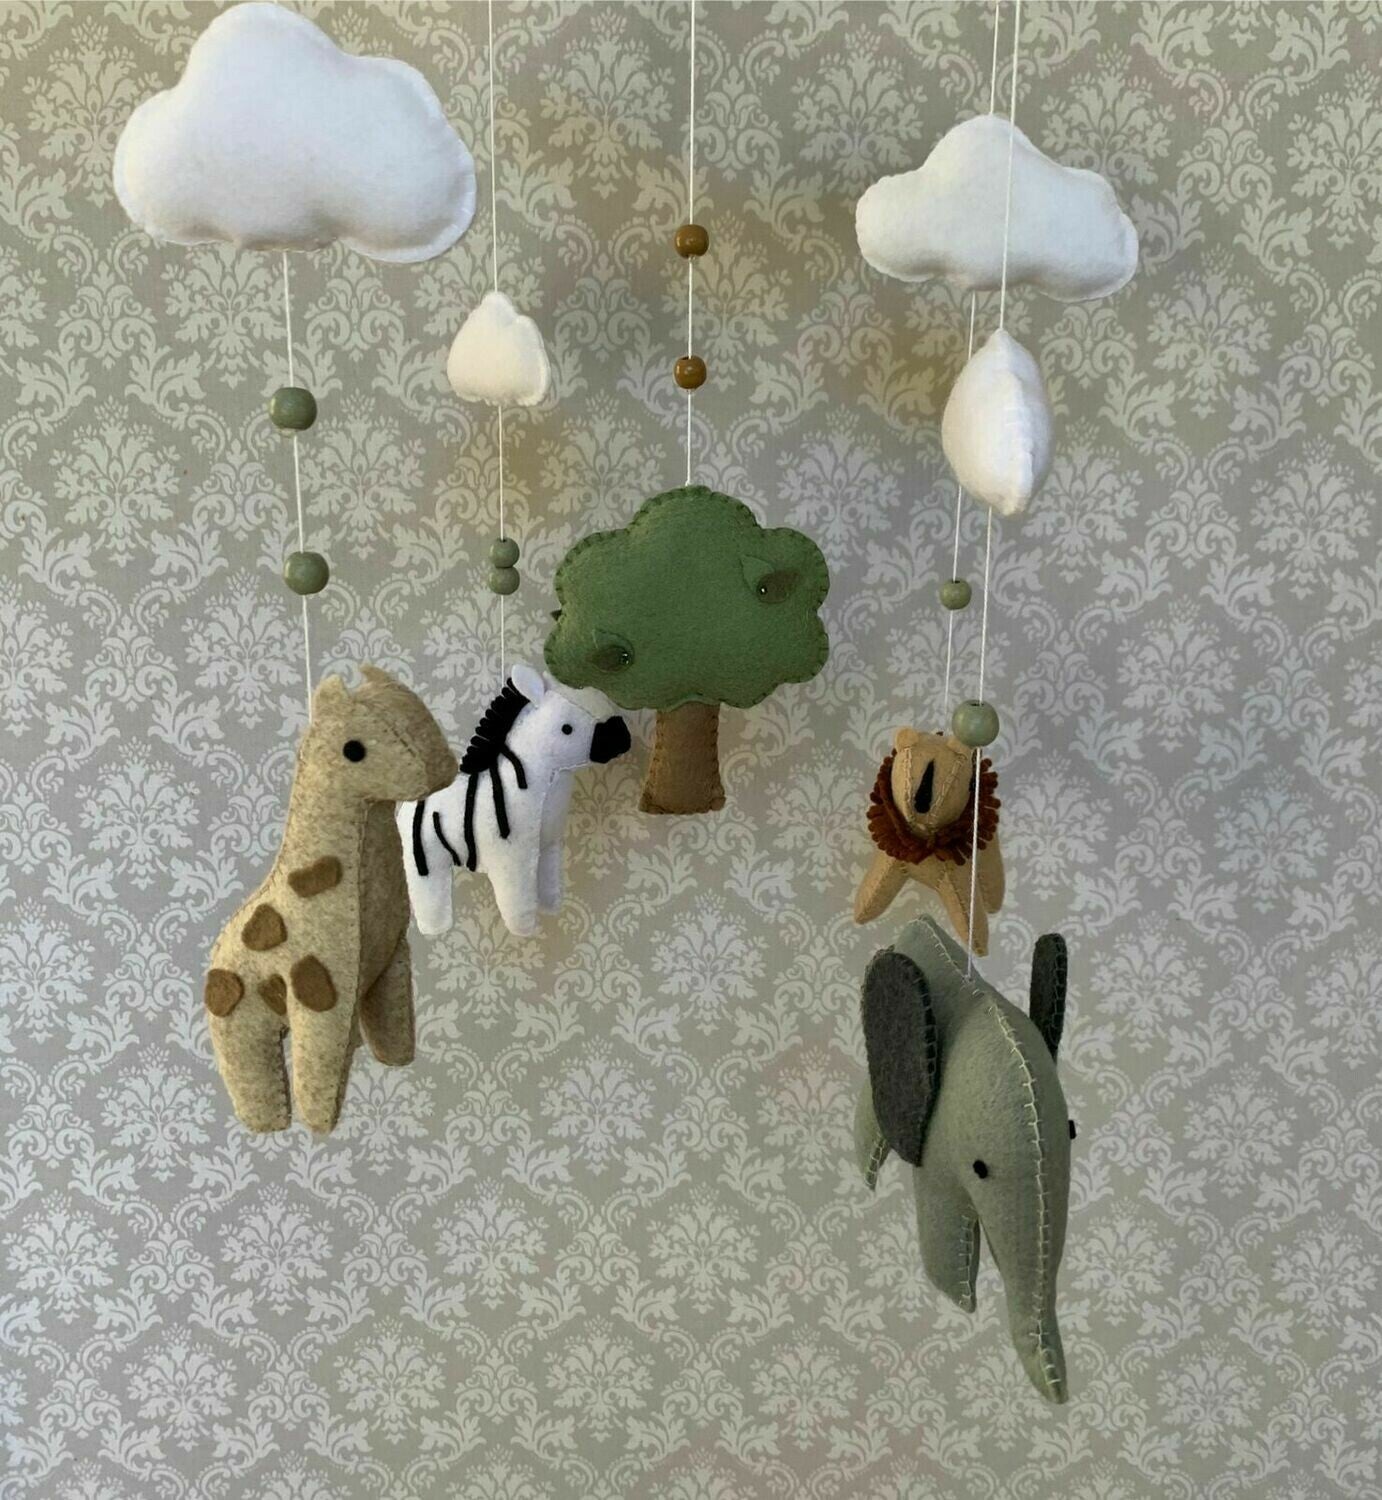 Buy Baby Cot Mobiles Online | Cotton Collective